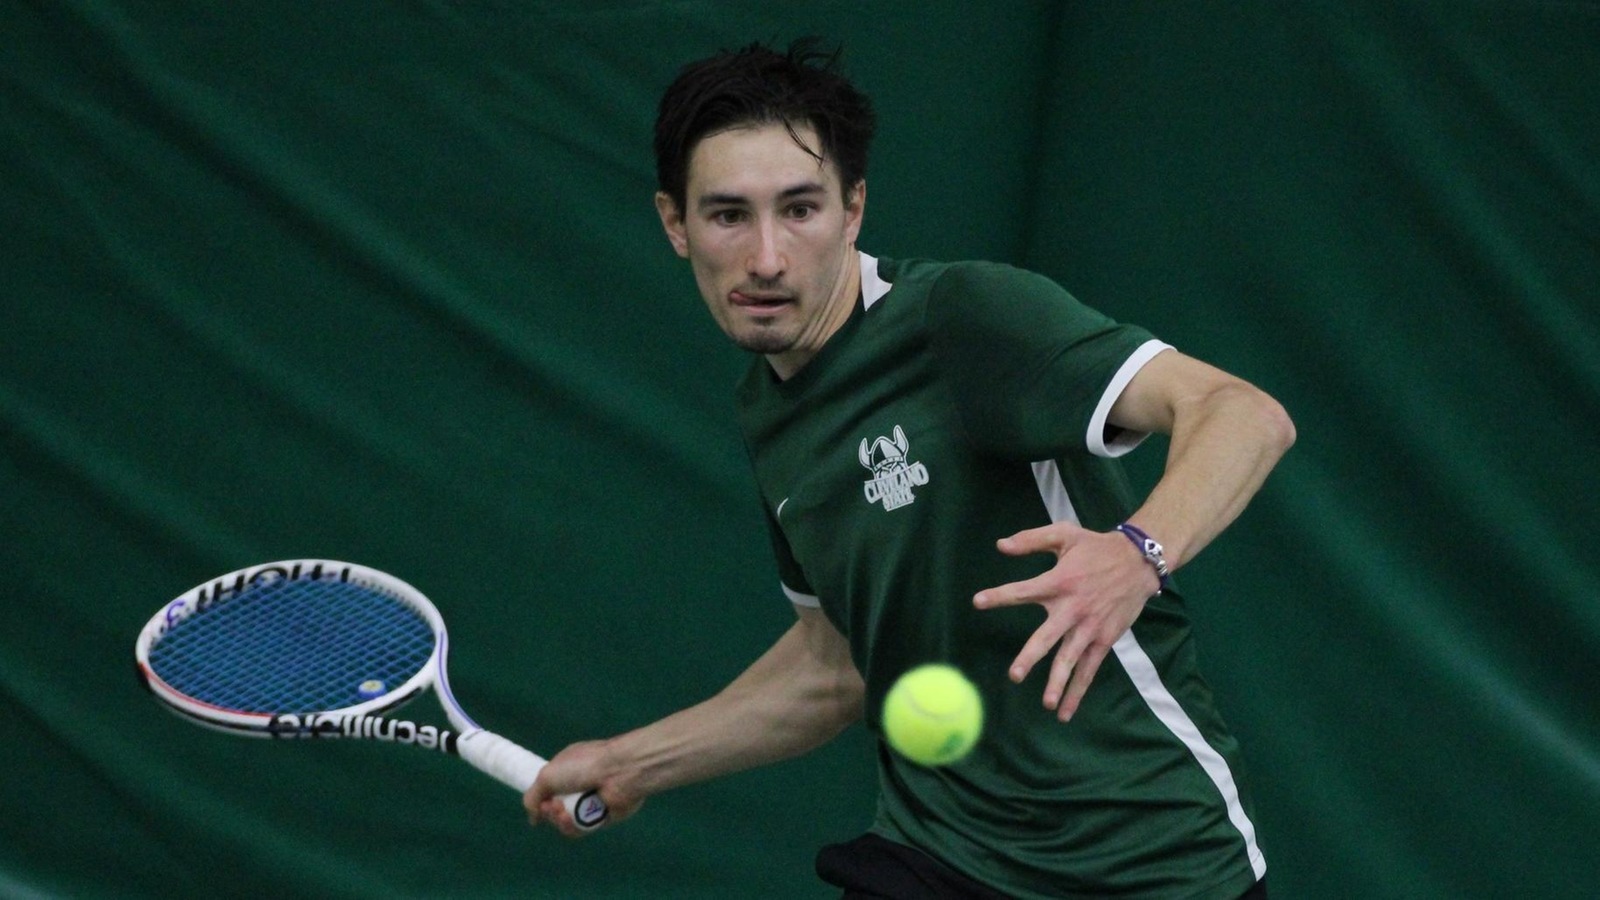 Cleveland State Men’s Tennis Opens #HLTennis Play With 5-2 Win Over IUPUI